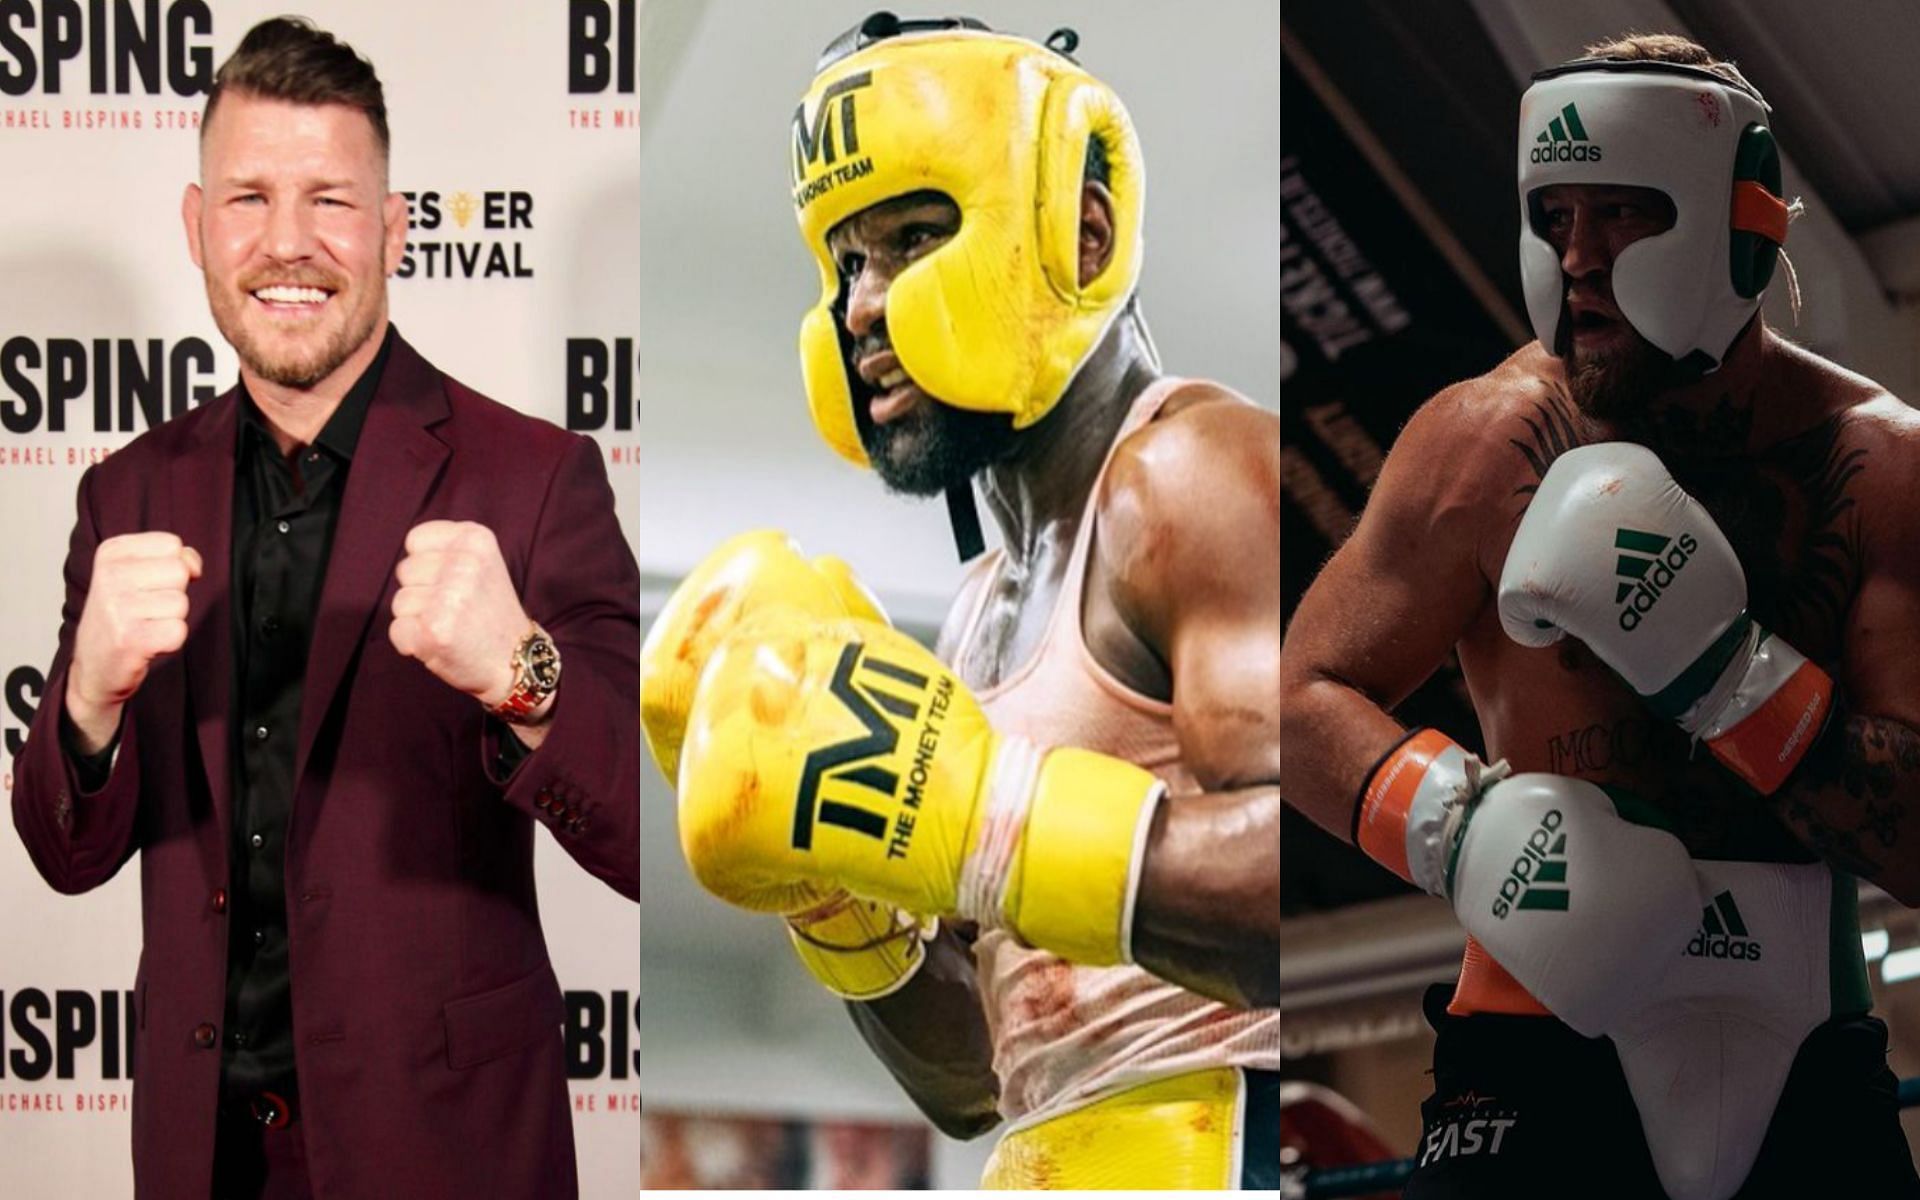 Michael Bisping (L), Floyd Mayweather (M), and Conor McGregor (R) [Images Courtesy: @mikebisping, @floydmayweather, and @thenotoriousmma on Instagram]